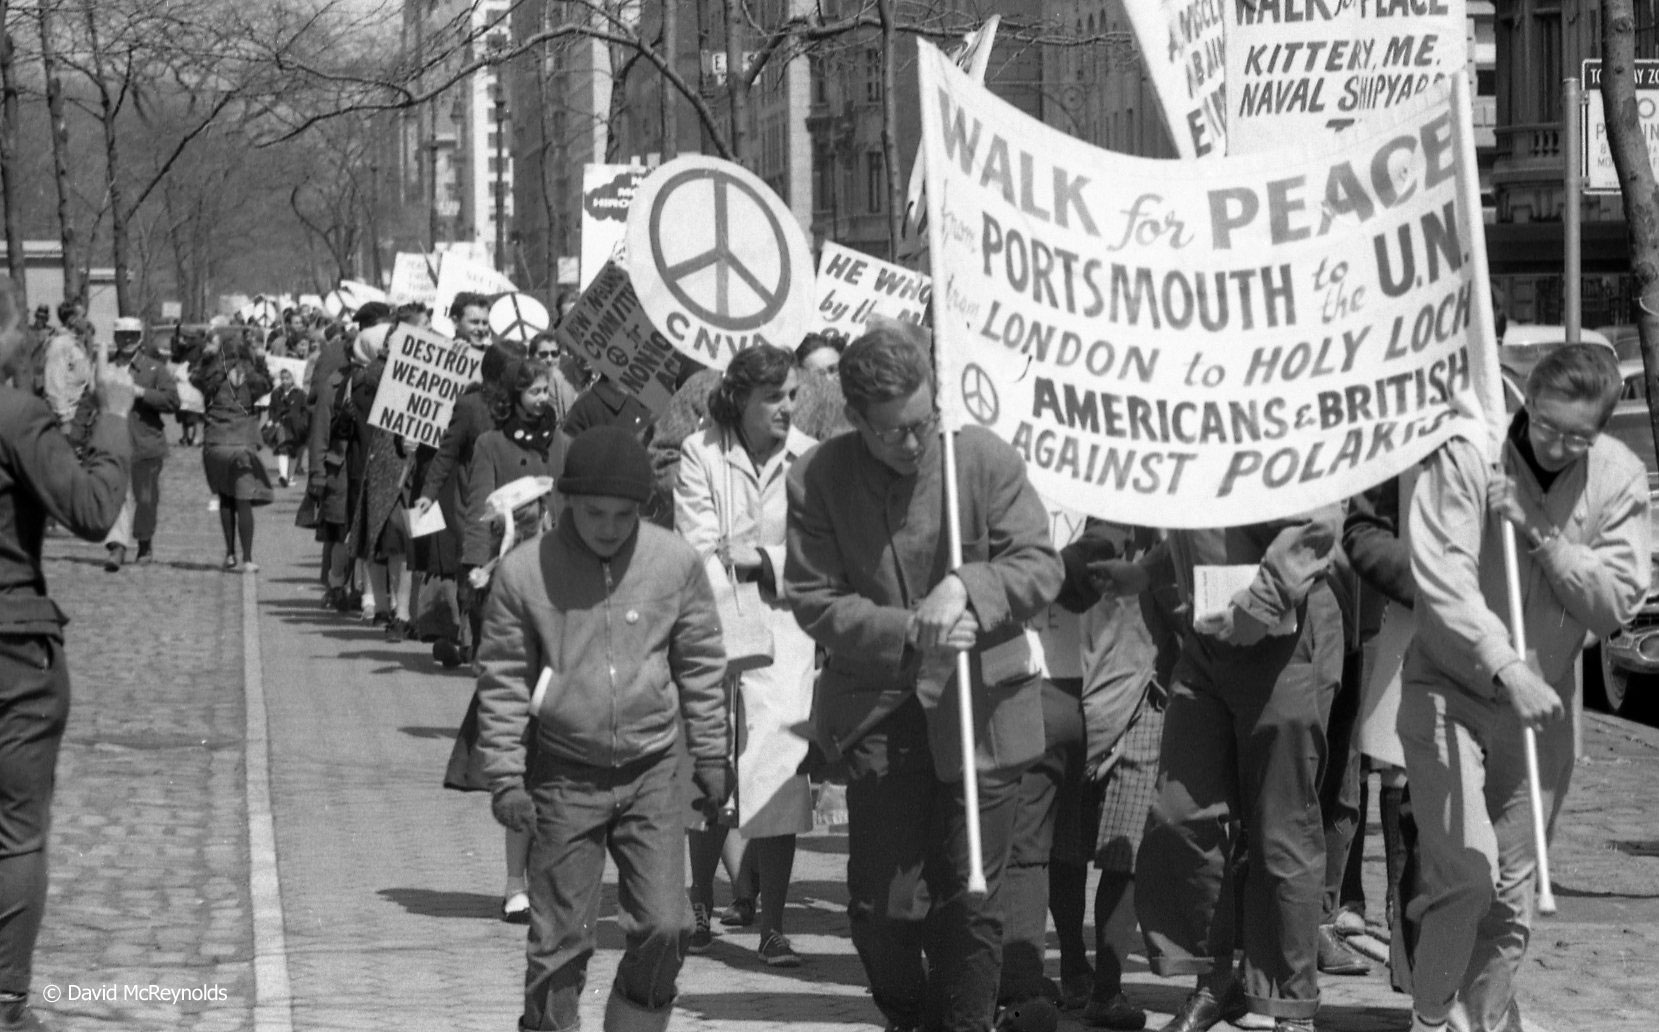 Walk for Peace 1961